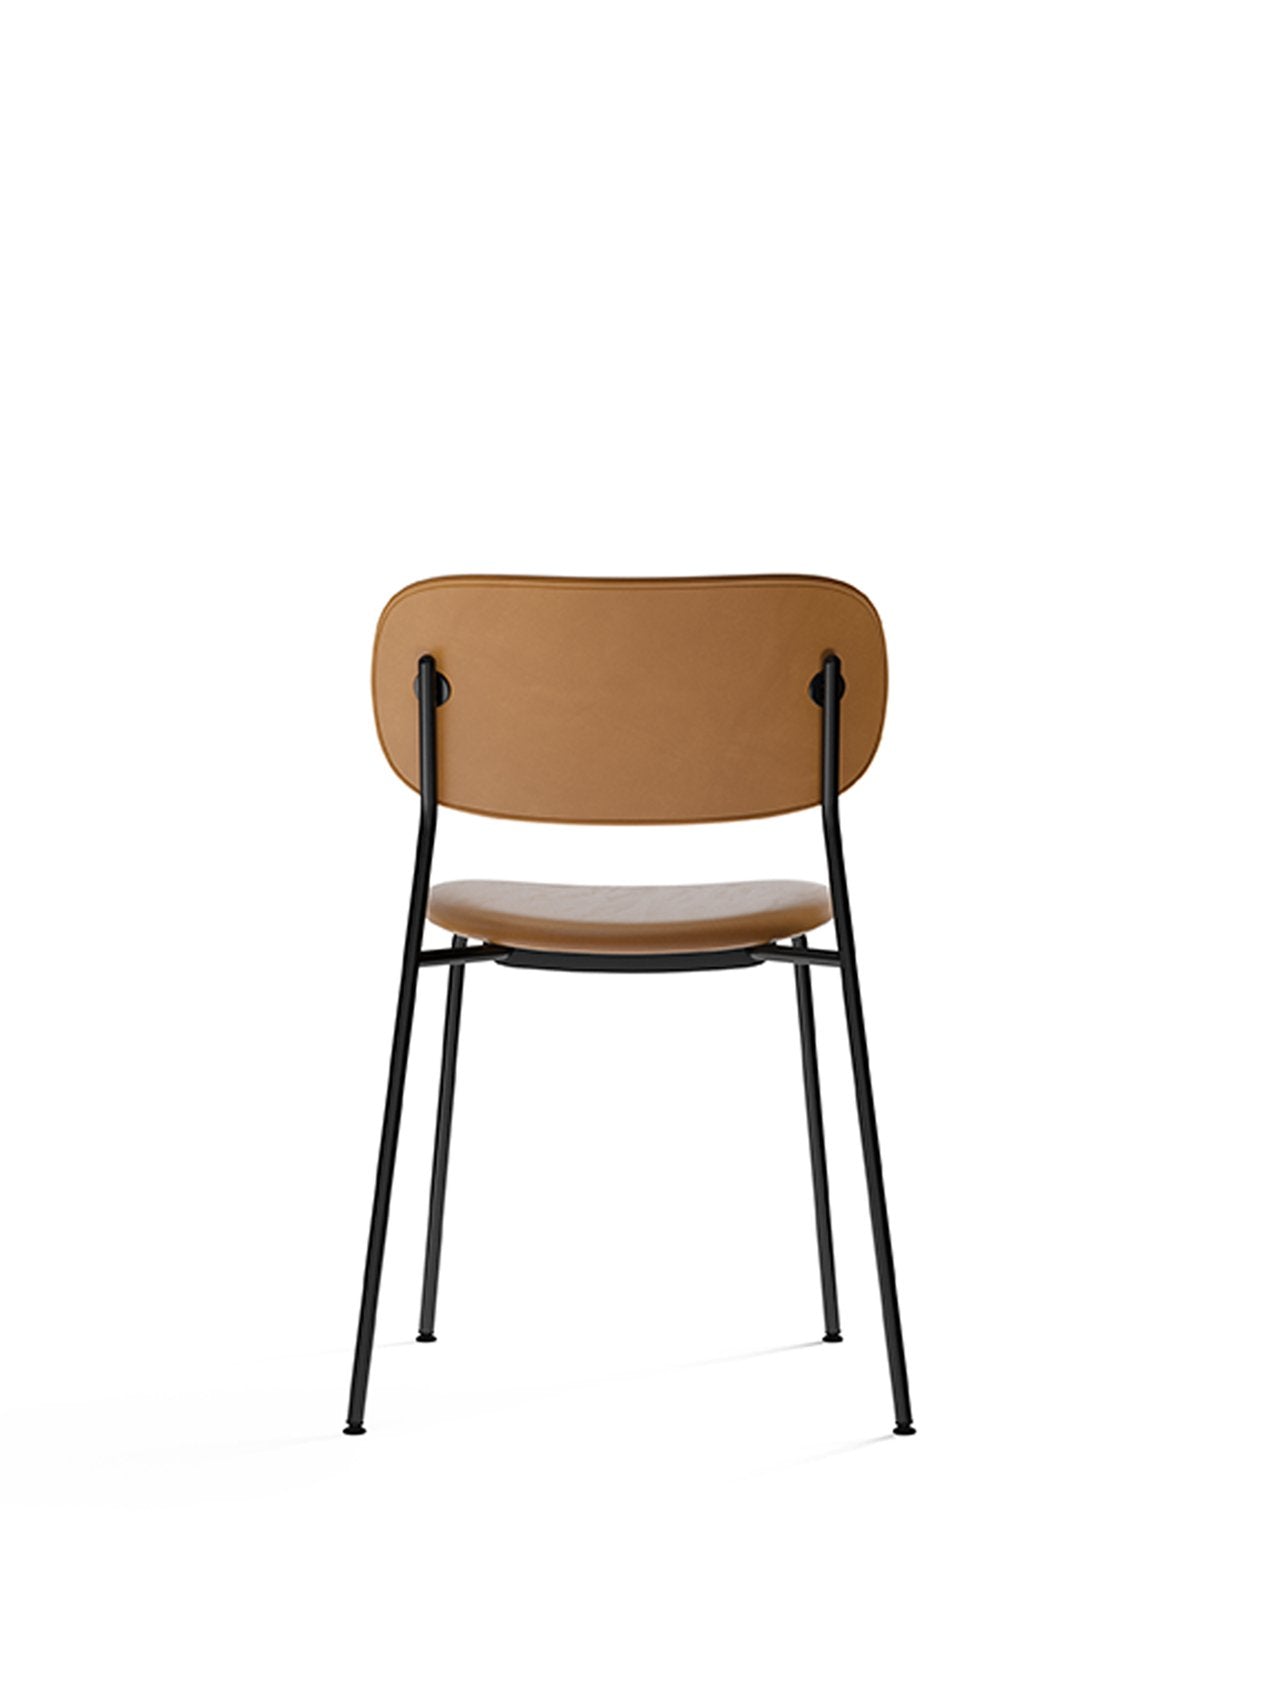 Co Chair, Fully Upholstered-Chair-MENU Design Shop